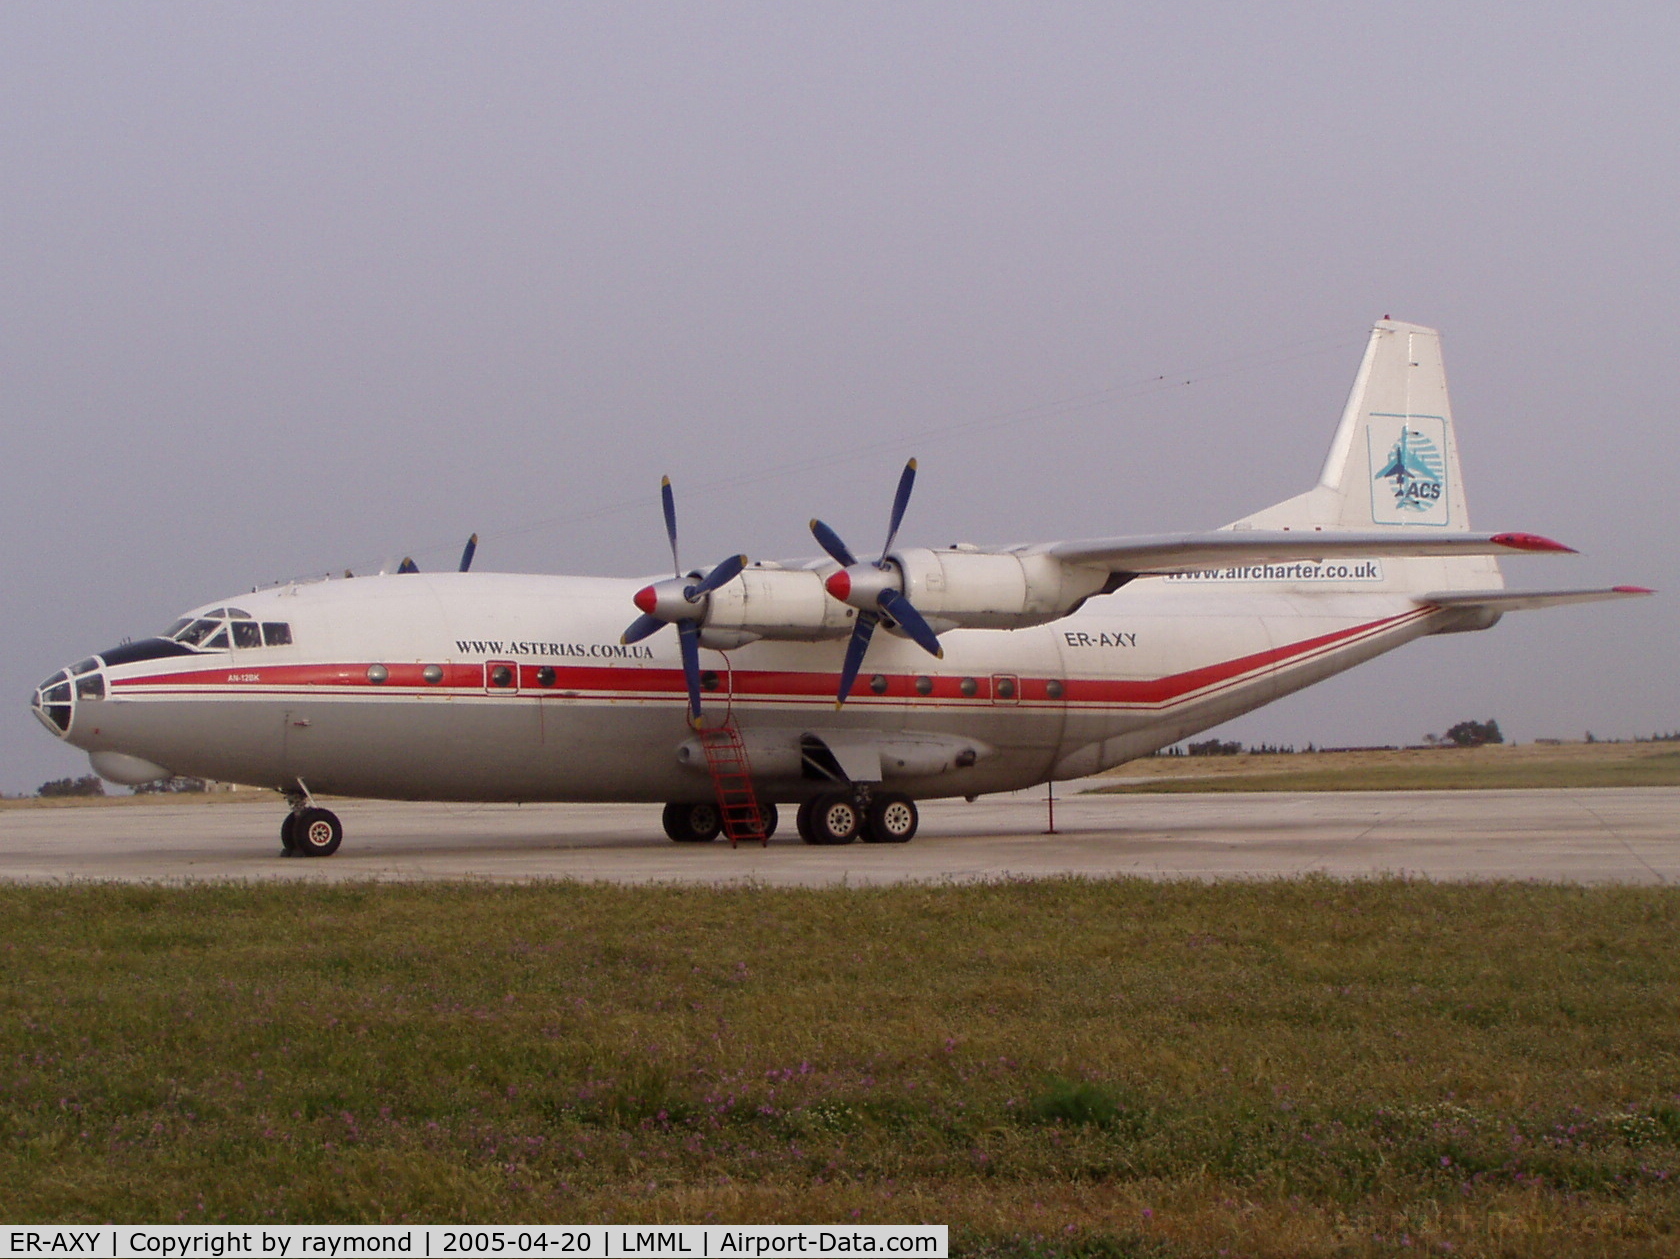 ER-AXY, 1969 Antonov An-12BK C/N 9346904, Seen here in Malta, this An12 parked on Apron 4 at Malta International Airport for an overnight stay.